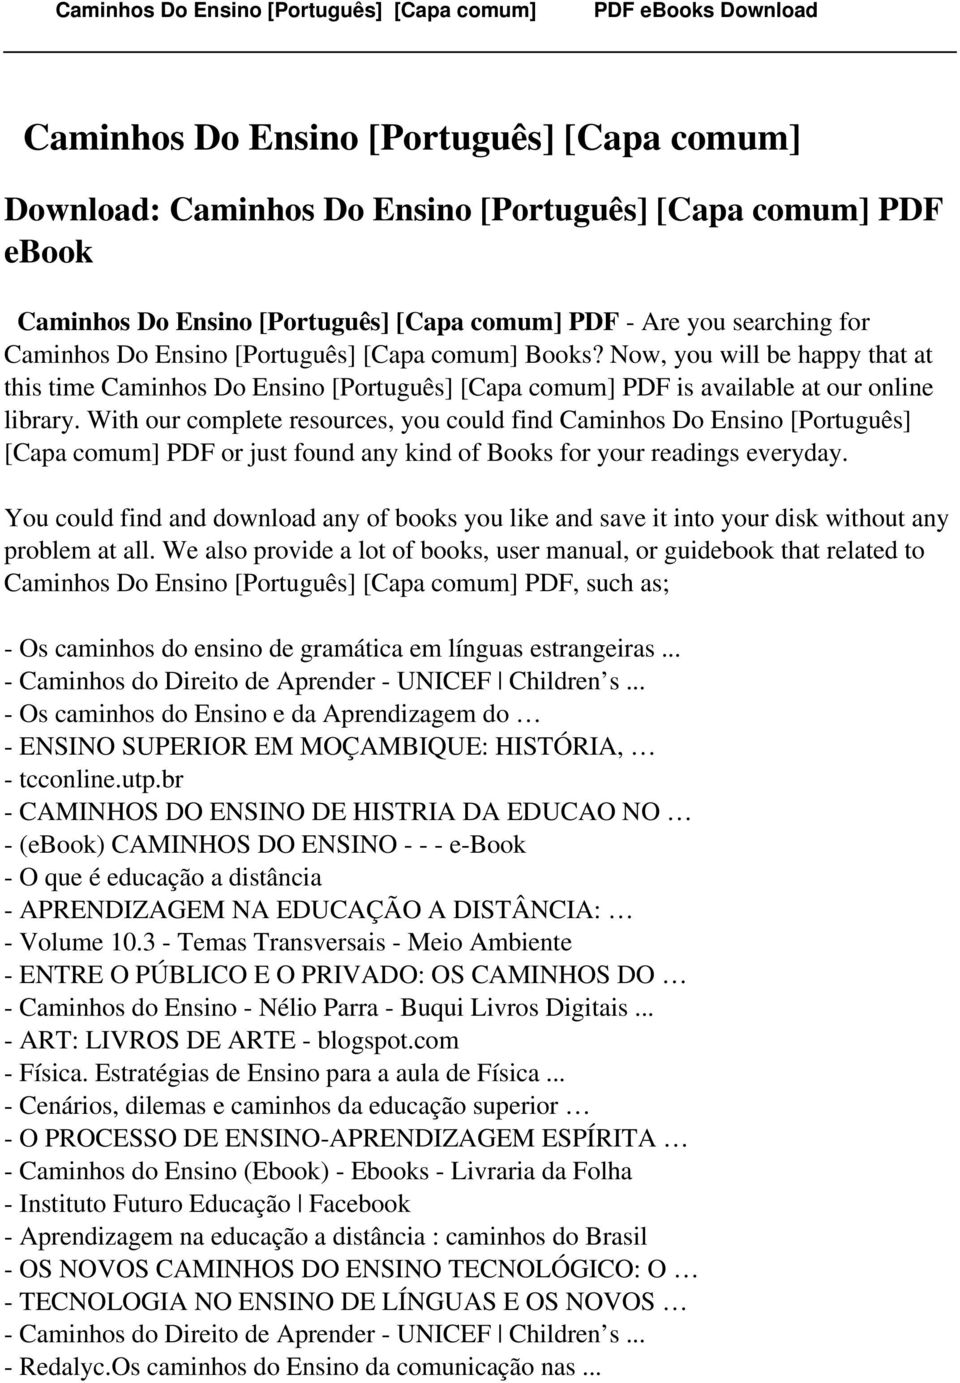 With our complete resources, you could find Caminhos Do Ensino [Português] [Capa comum] PDF or just found any kind of Books for your readings everyday.